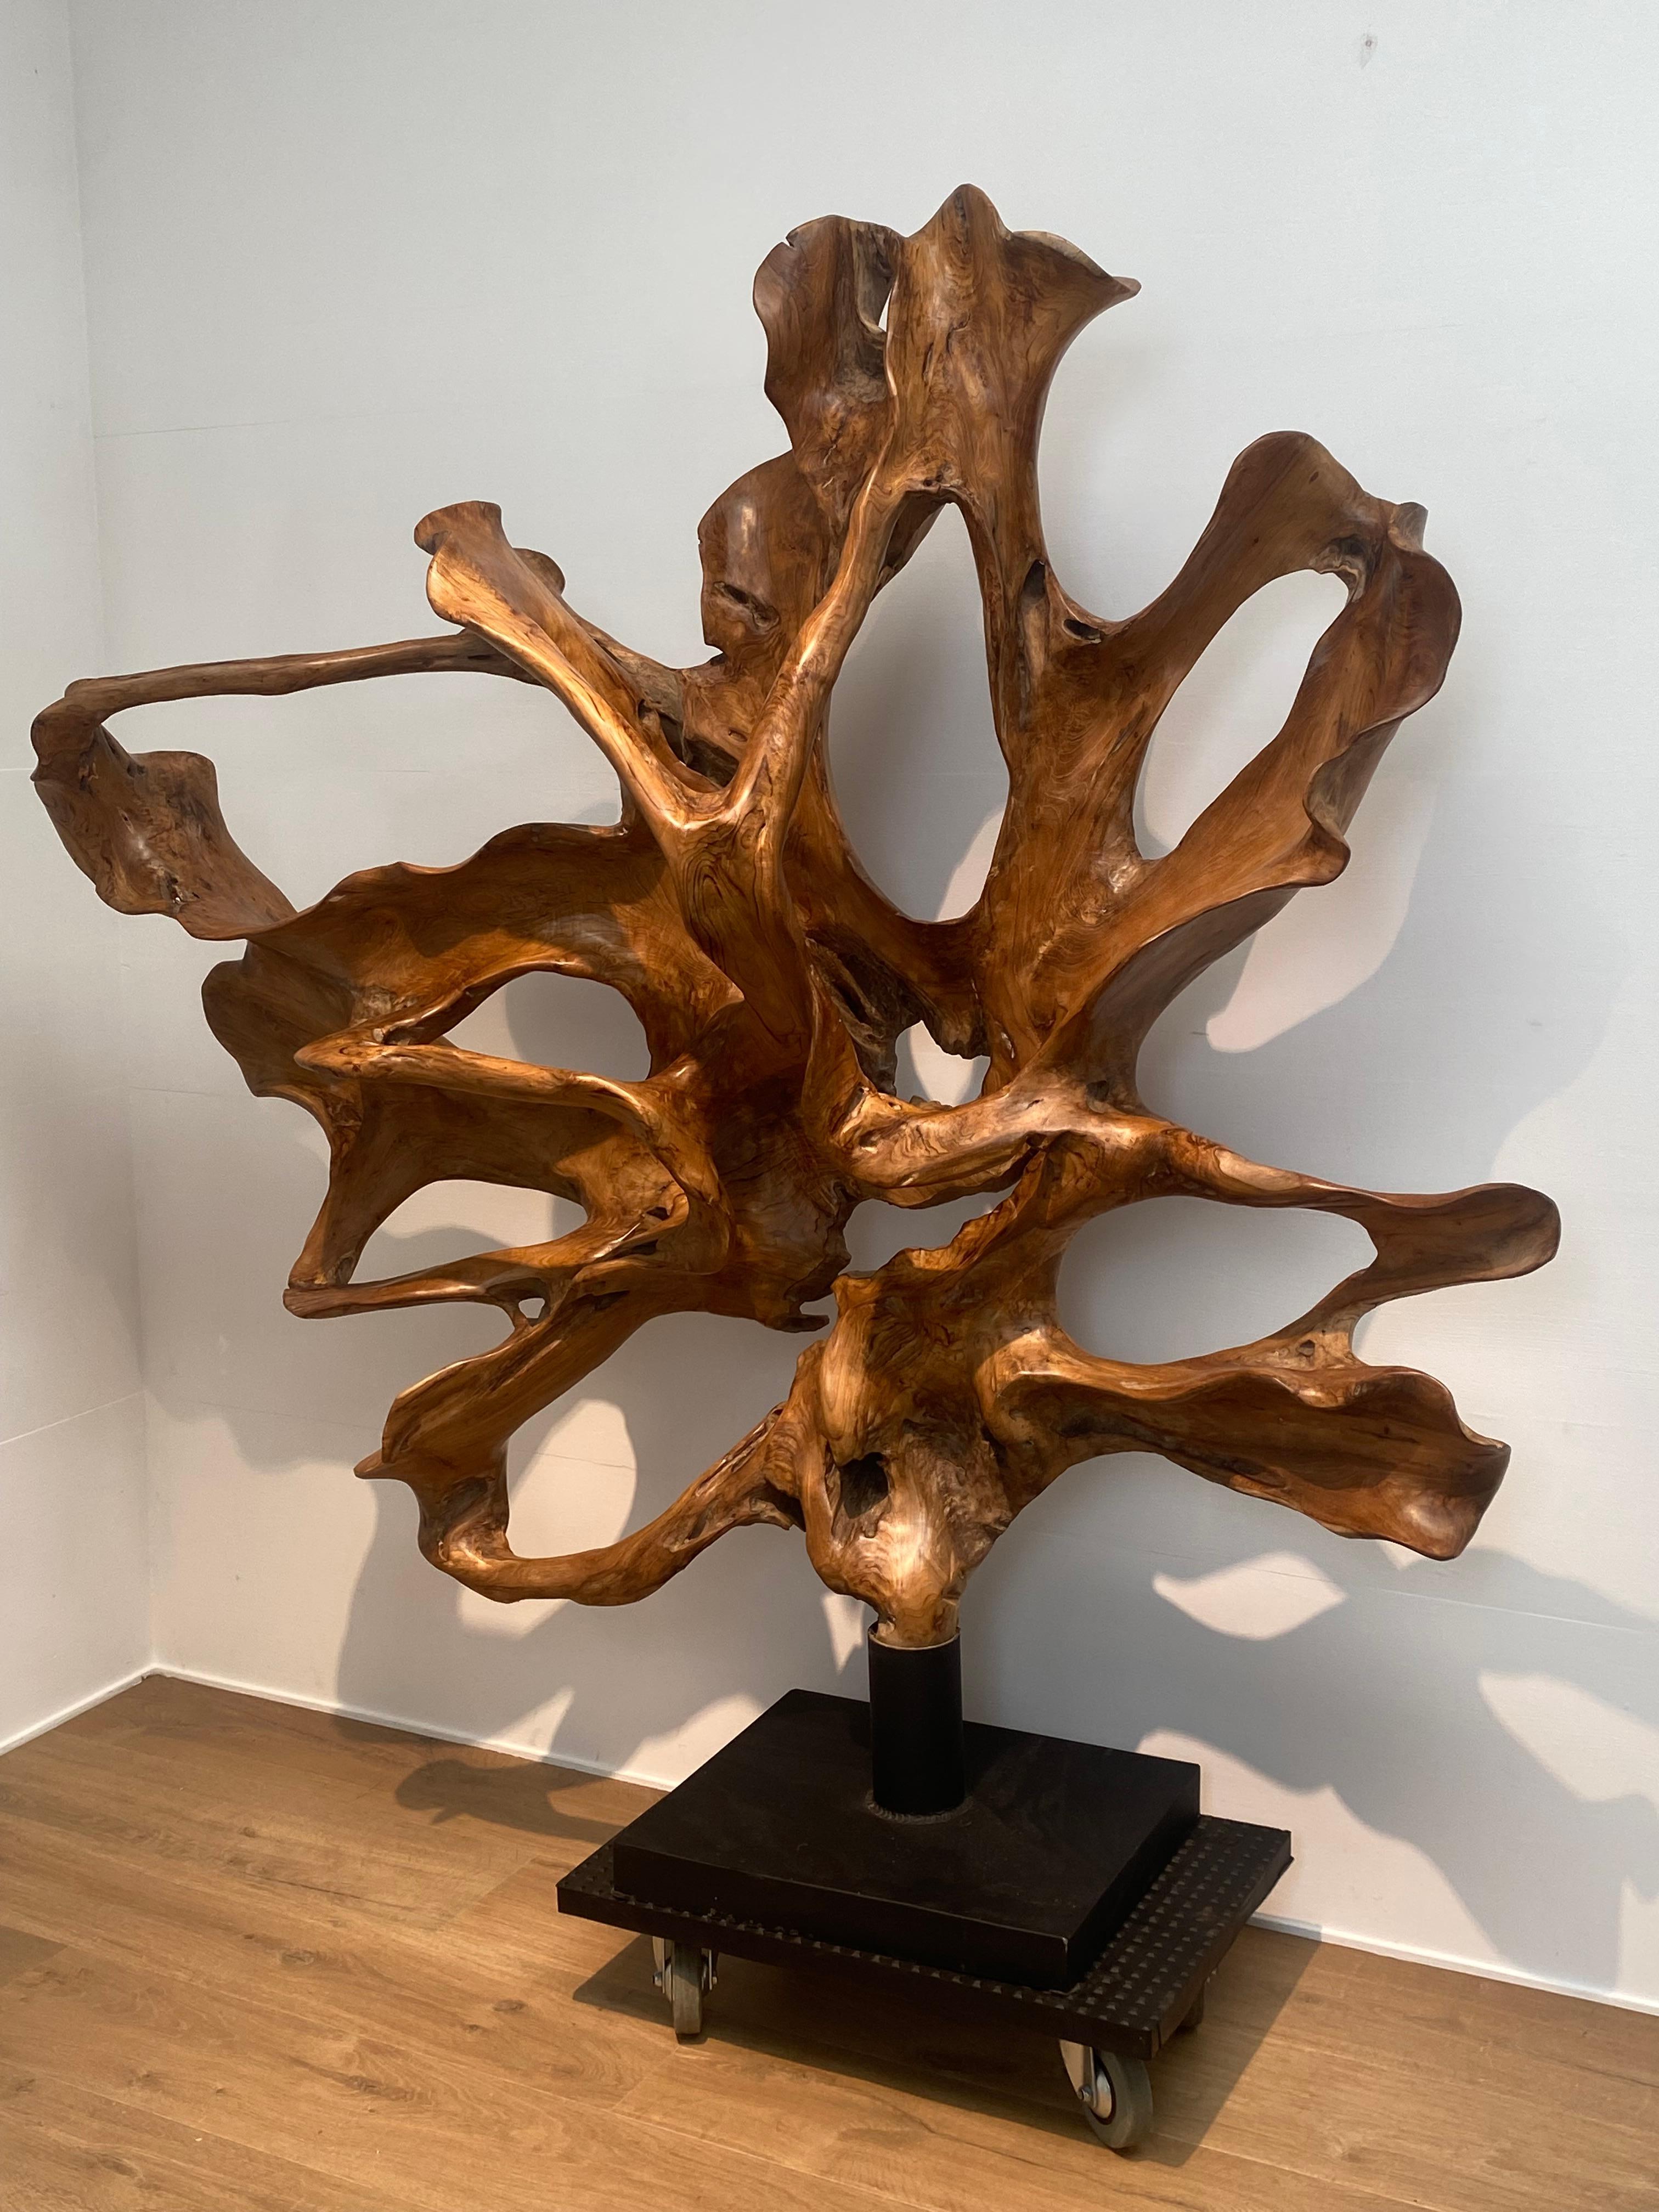 Exceptional Contemporary Sculpture in a Polished Teak Wood,
amazing round organic form,
made from an old one piece Wooden Root,
mounted on an iron base,
can be placed in 2 positions, ideal to divide a room,
very decorative piece of furniture
